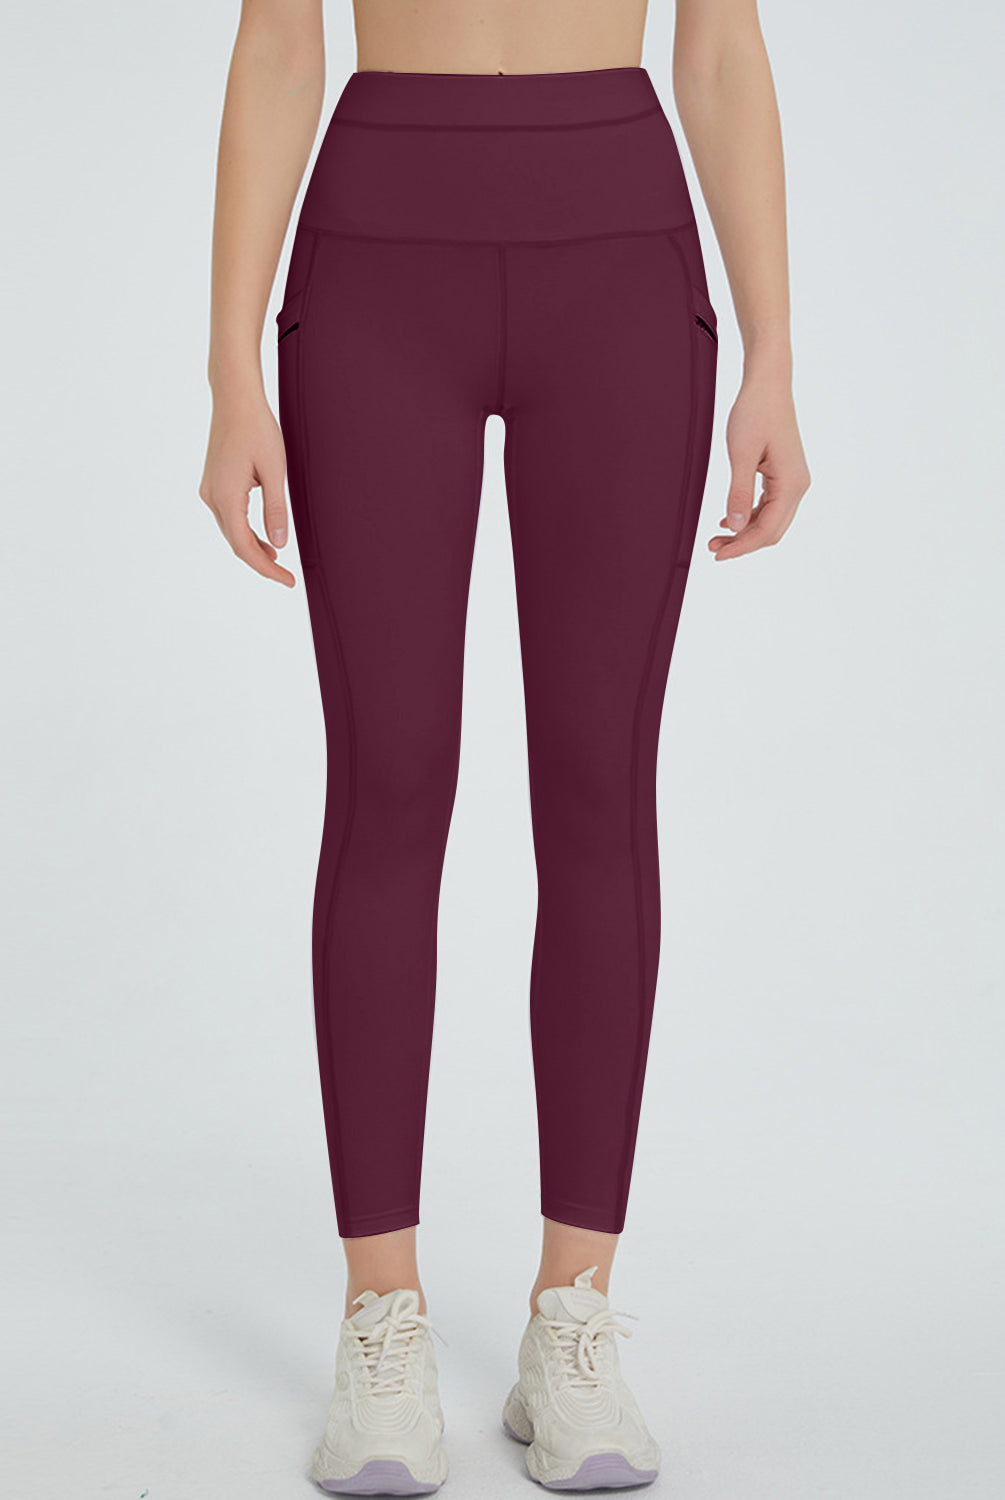 Active woman posing in versatile high-waisted leggings with a handy pocket, paired with athletic sneakers.